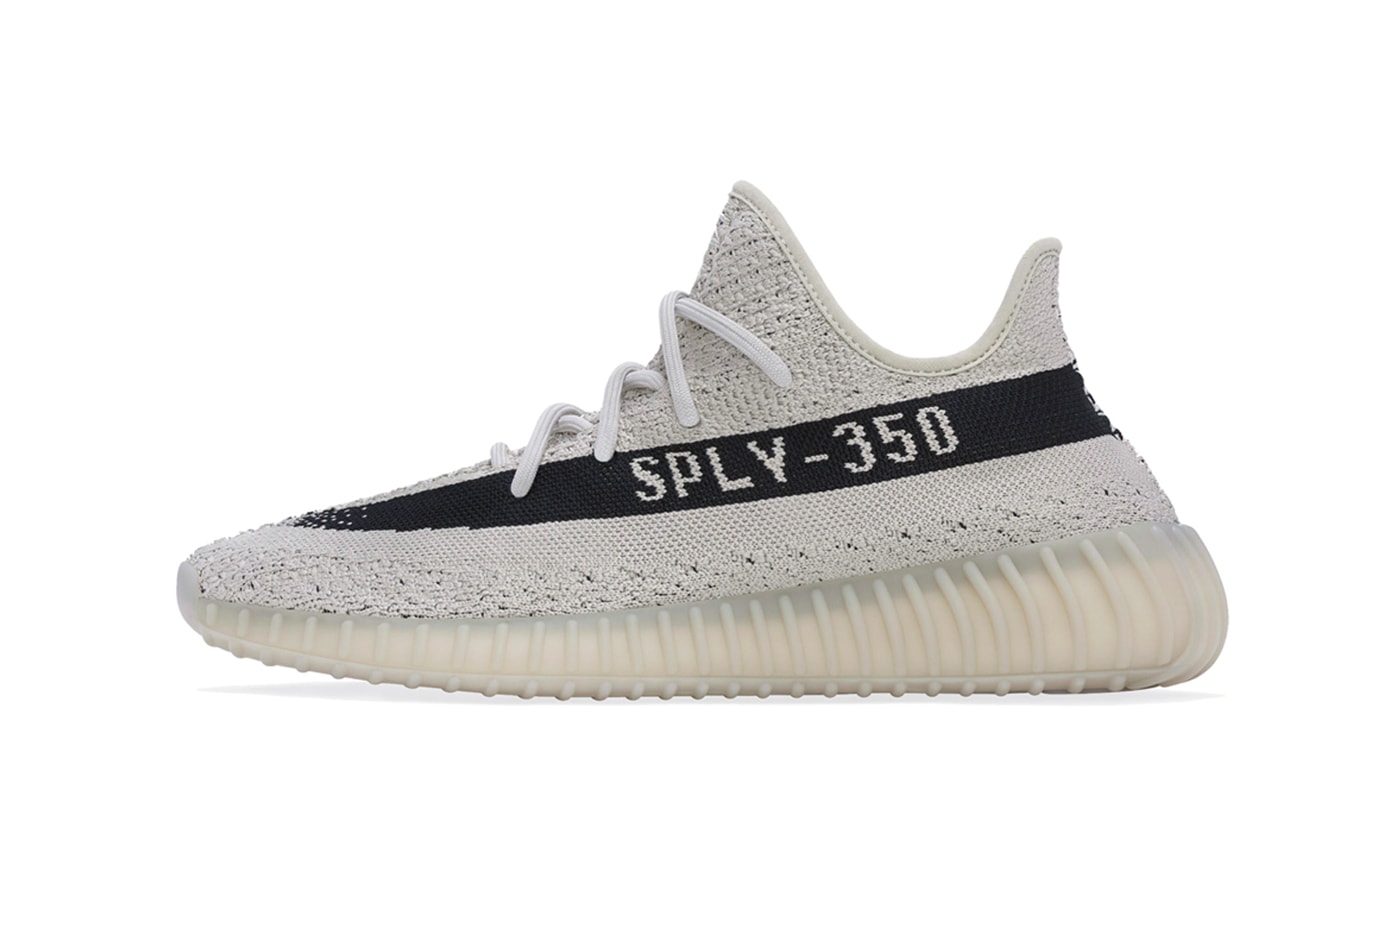 adidas YEEZY BOOST 350 V2 Slate HP7870 Release Date info store list buying guide photos price